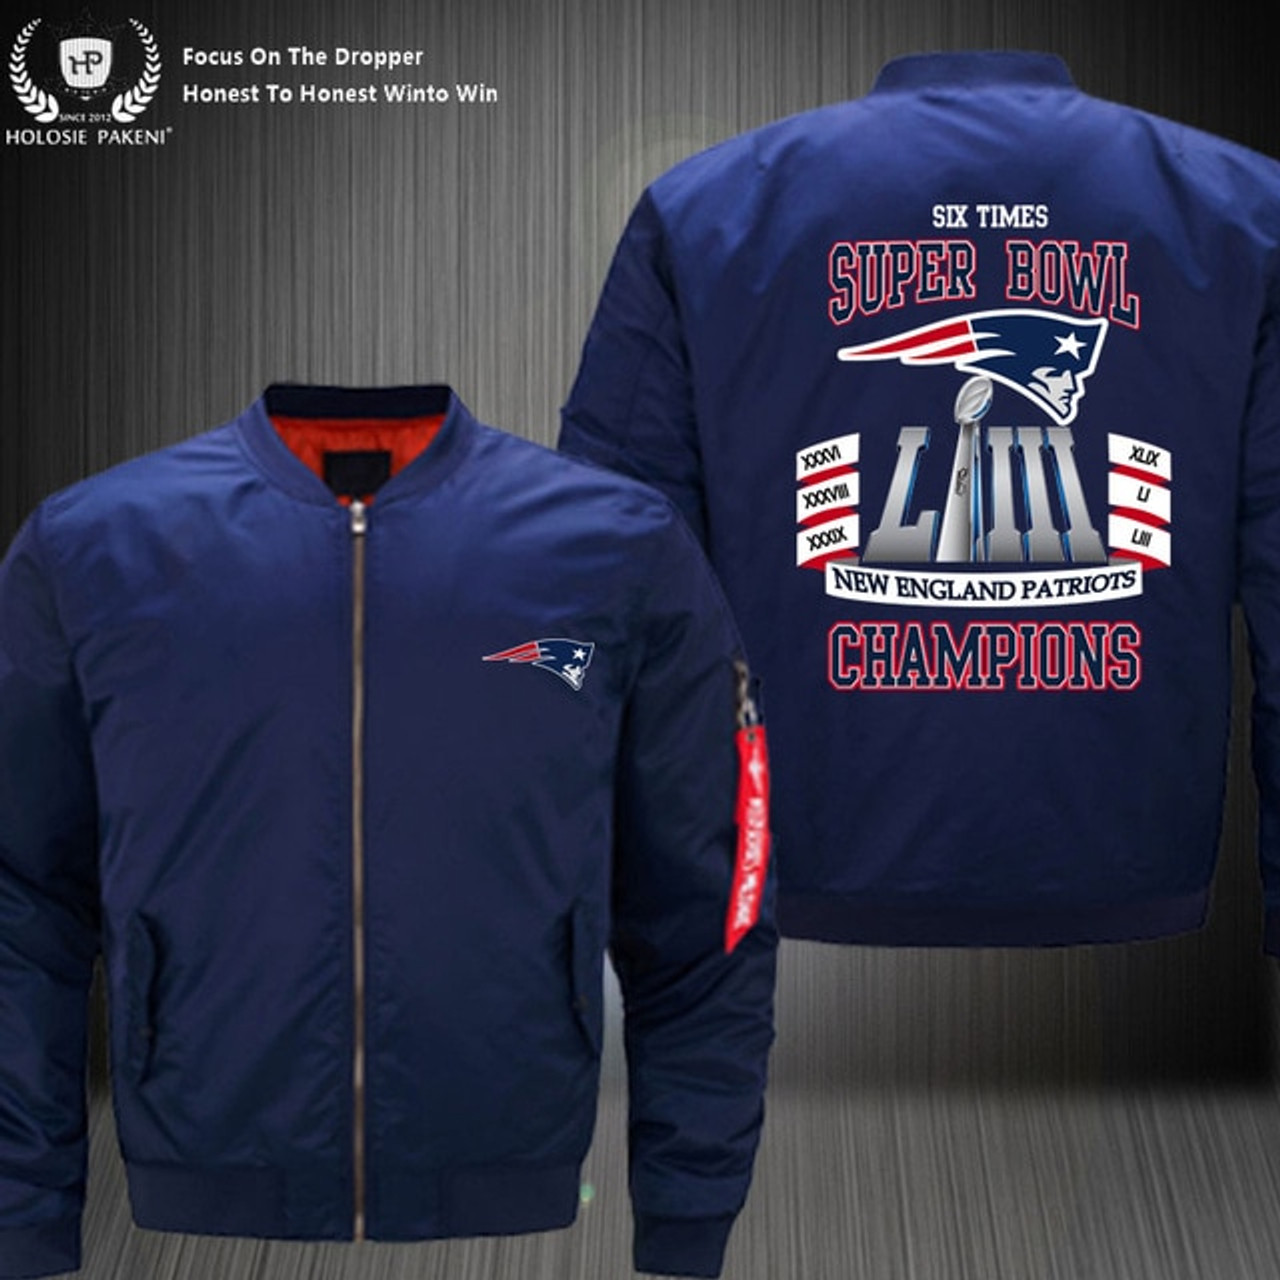 **(OFFICIAL-N.F.L.NEW-ENGLAND-PATRIOT-CUSTOM-SUPER-BOWL-LIII-CHAMPIONS-BOMBER-FLIGHT-JACKETS/SIX-TIMES-SUPER-BOWL-CHAMPION-WINNERS/NICE-CUSTOM-GRAPHIC-DOUBLE-SIDED-PRINTING/WITH-OFFICIAL-PATRIOTS-LOGOS & OFFICIAL-NFL-PATRIOTS-TEAM-COLORS)**